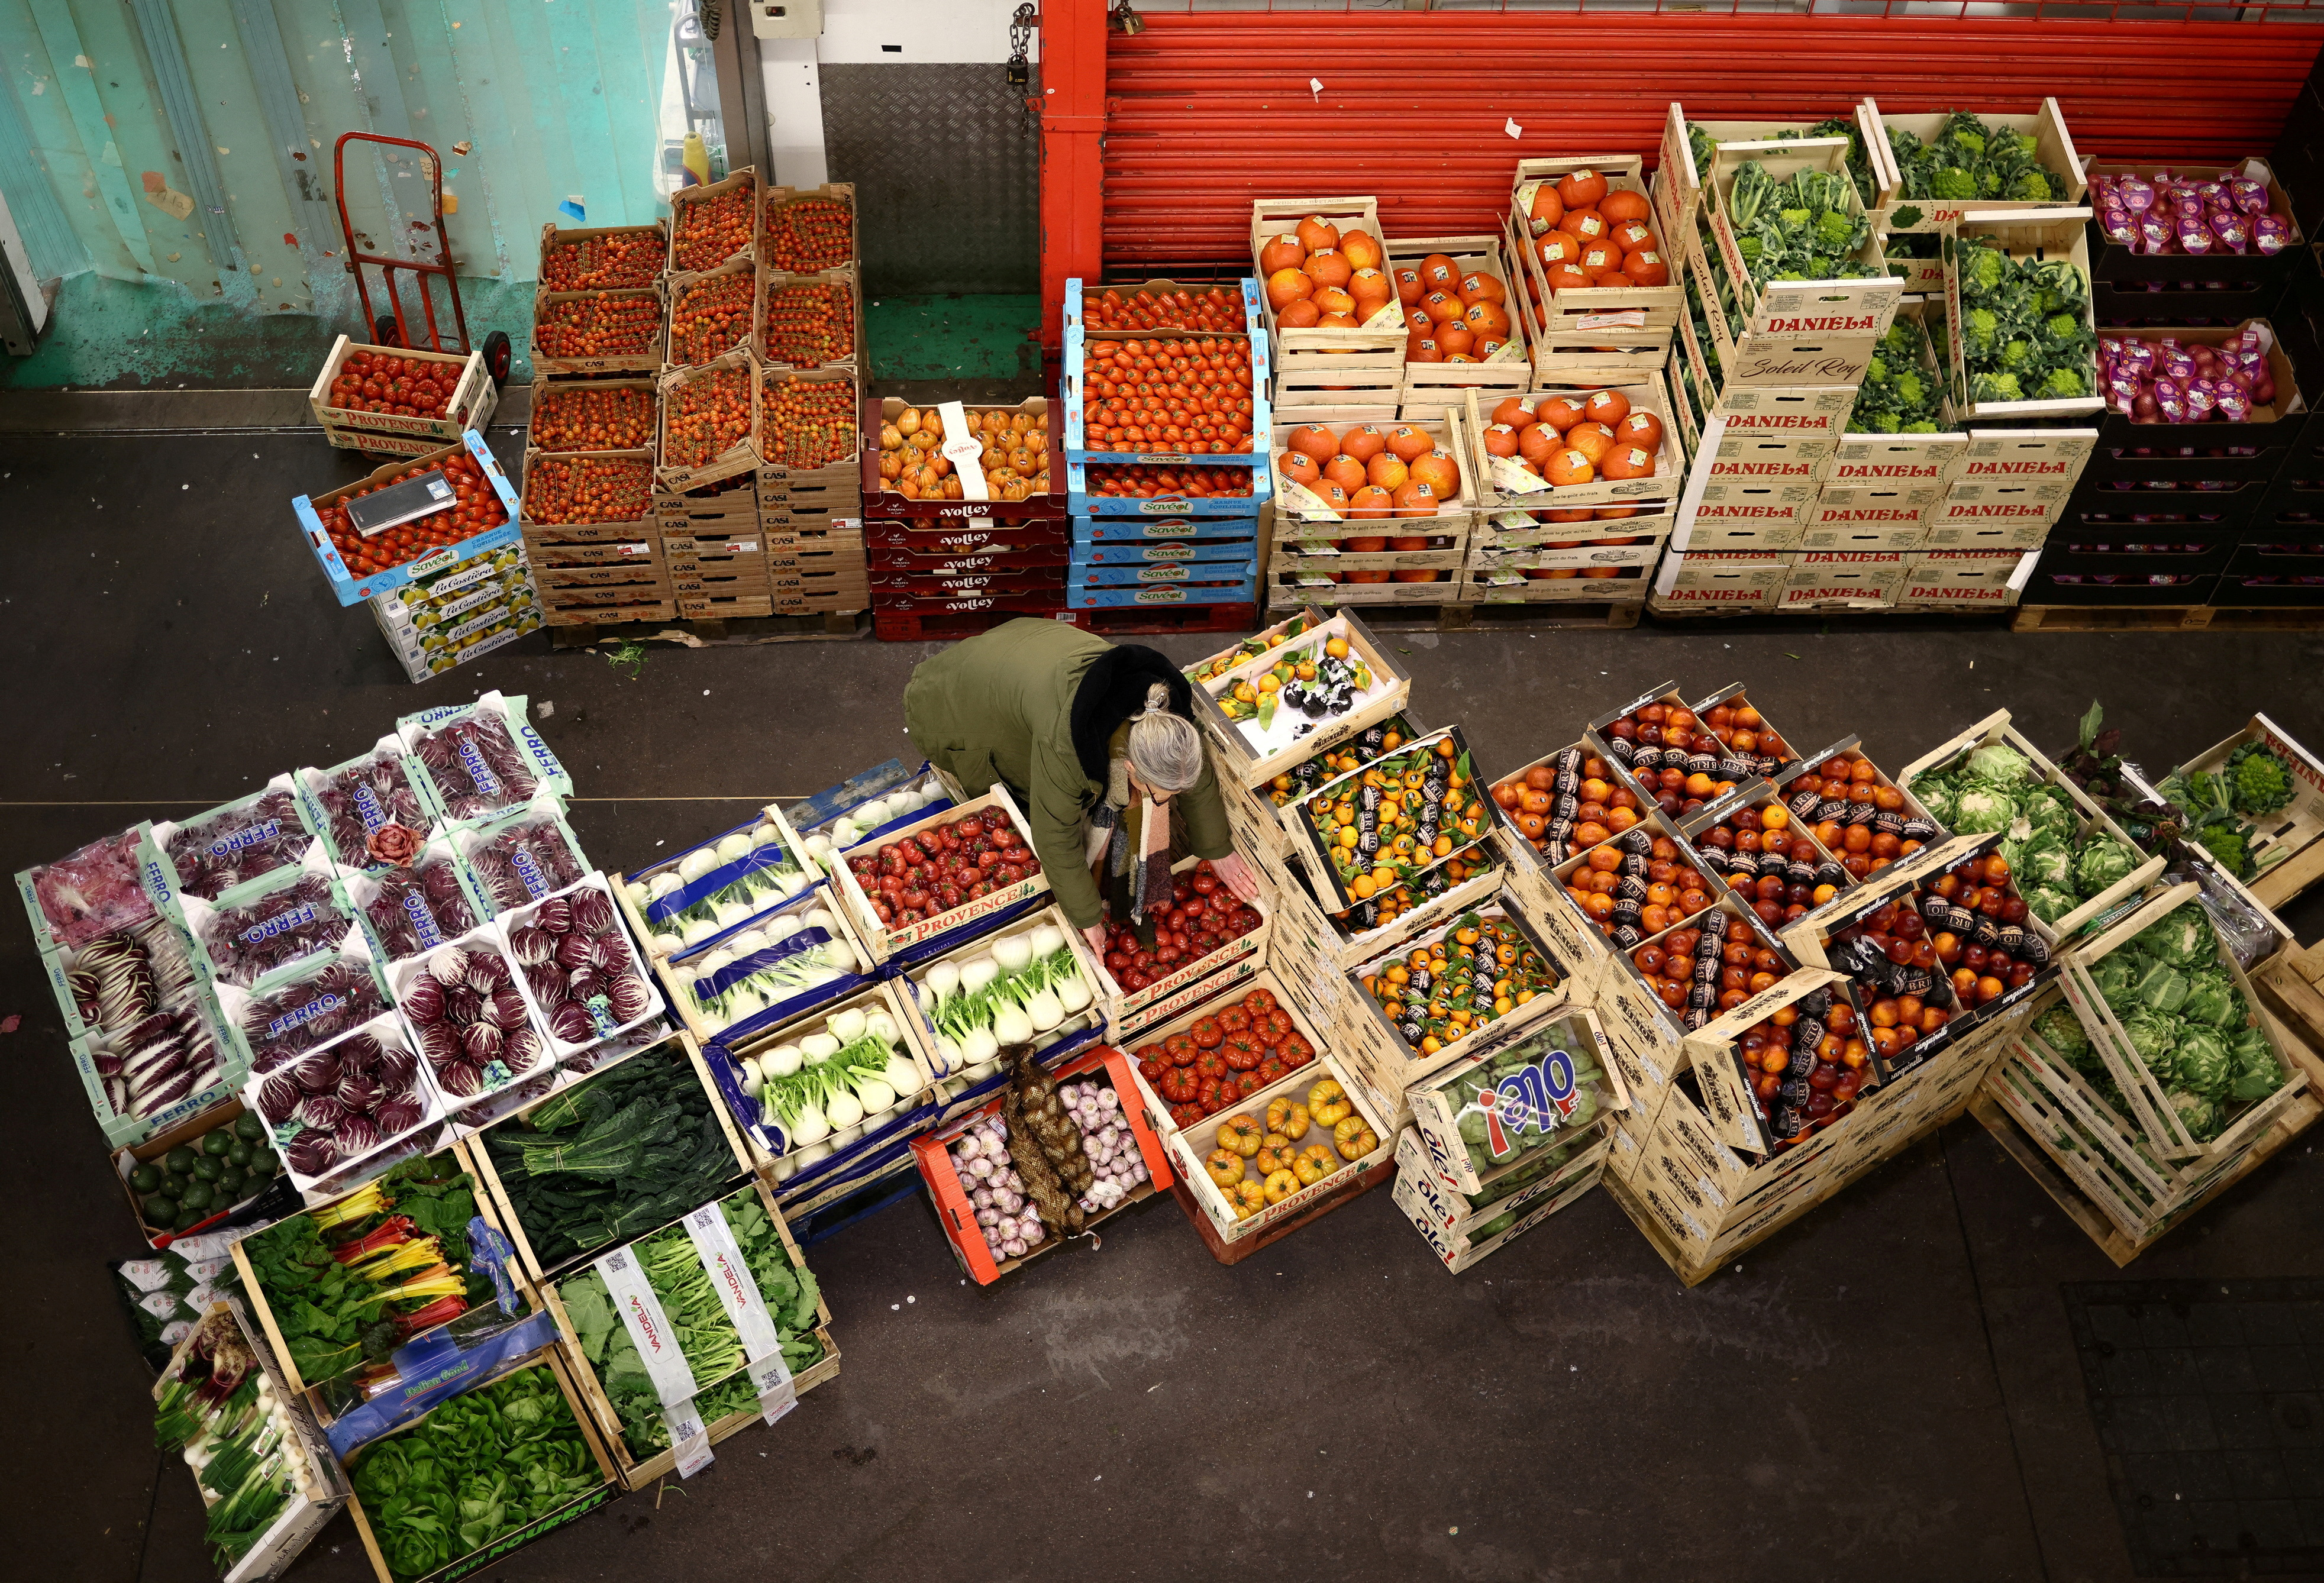 Fruit and vegetable trade at New Covent Garden Market in London